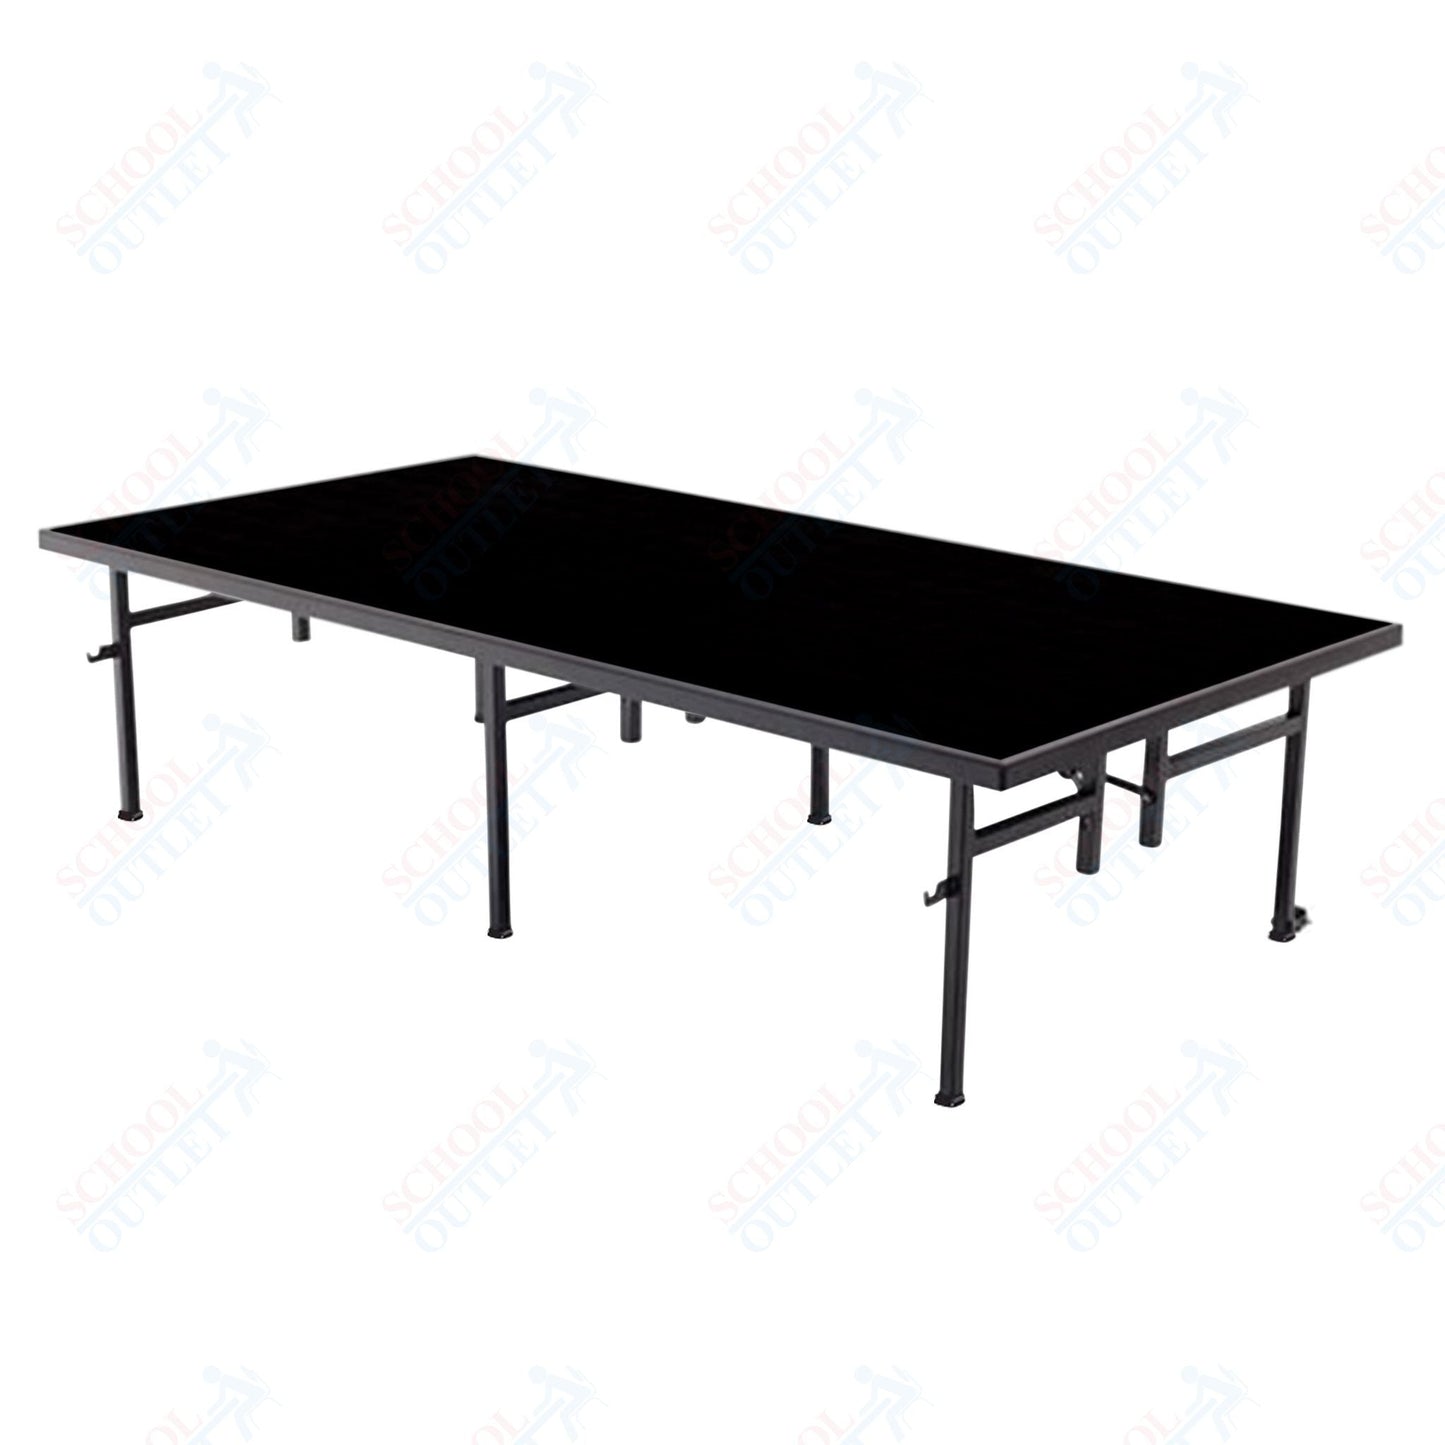 AmTab Fixed Height Stage - Polypropylene Top - 48"W x 72"L x 8"H (AmTab AMT - ST4608P) - SchoolOutlet